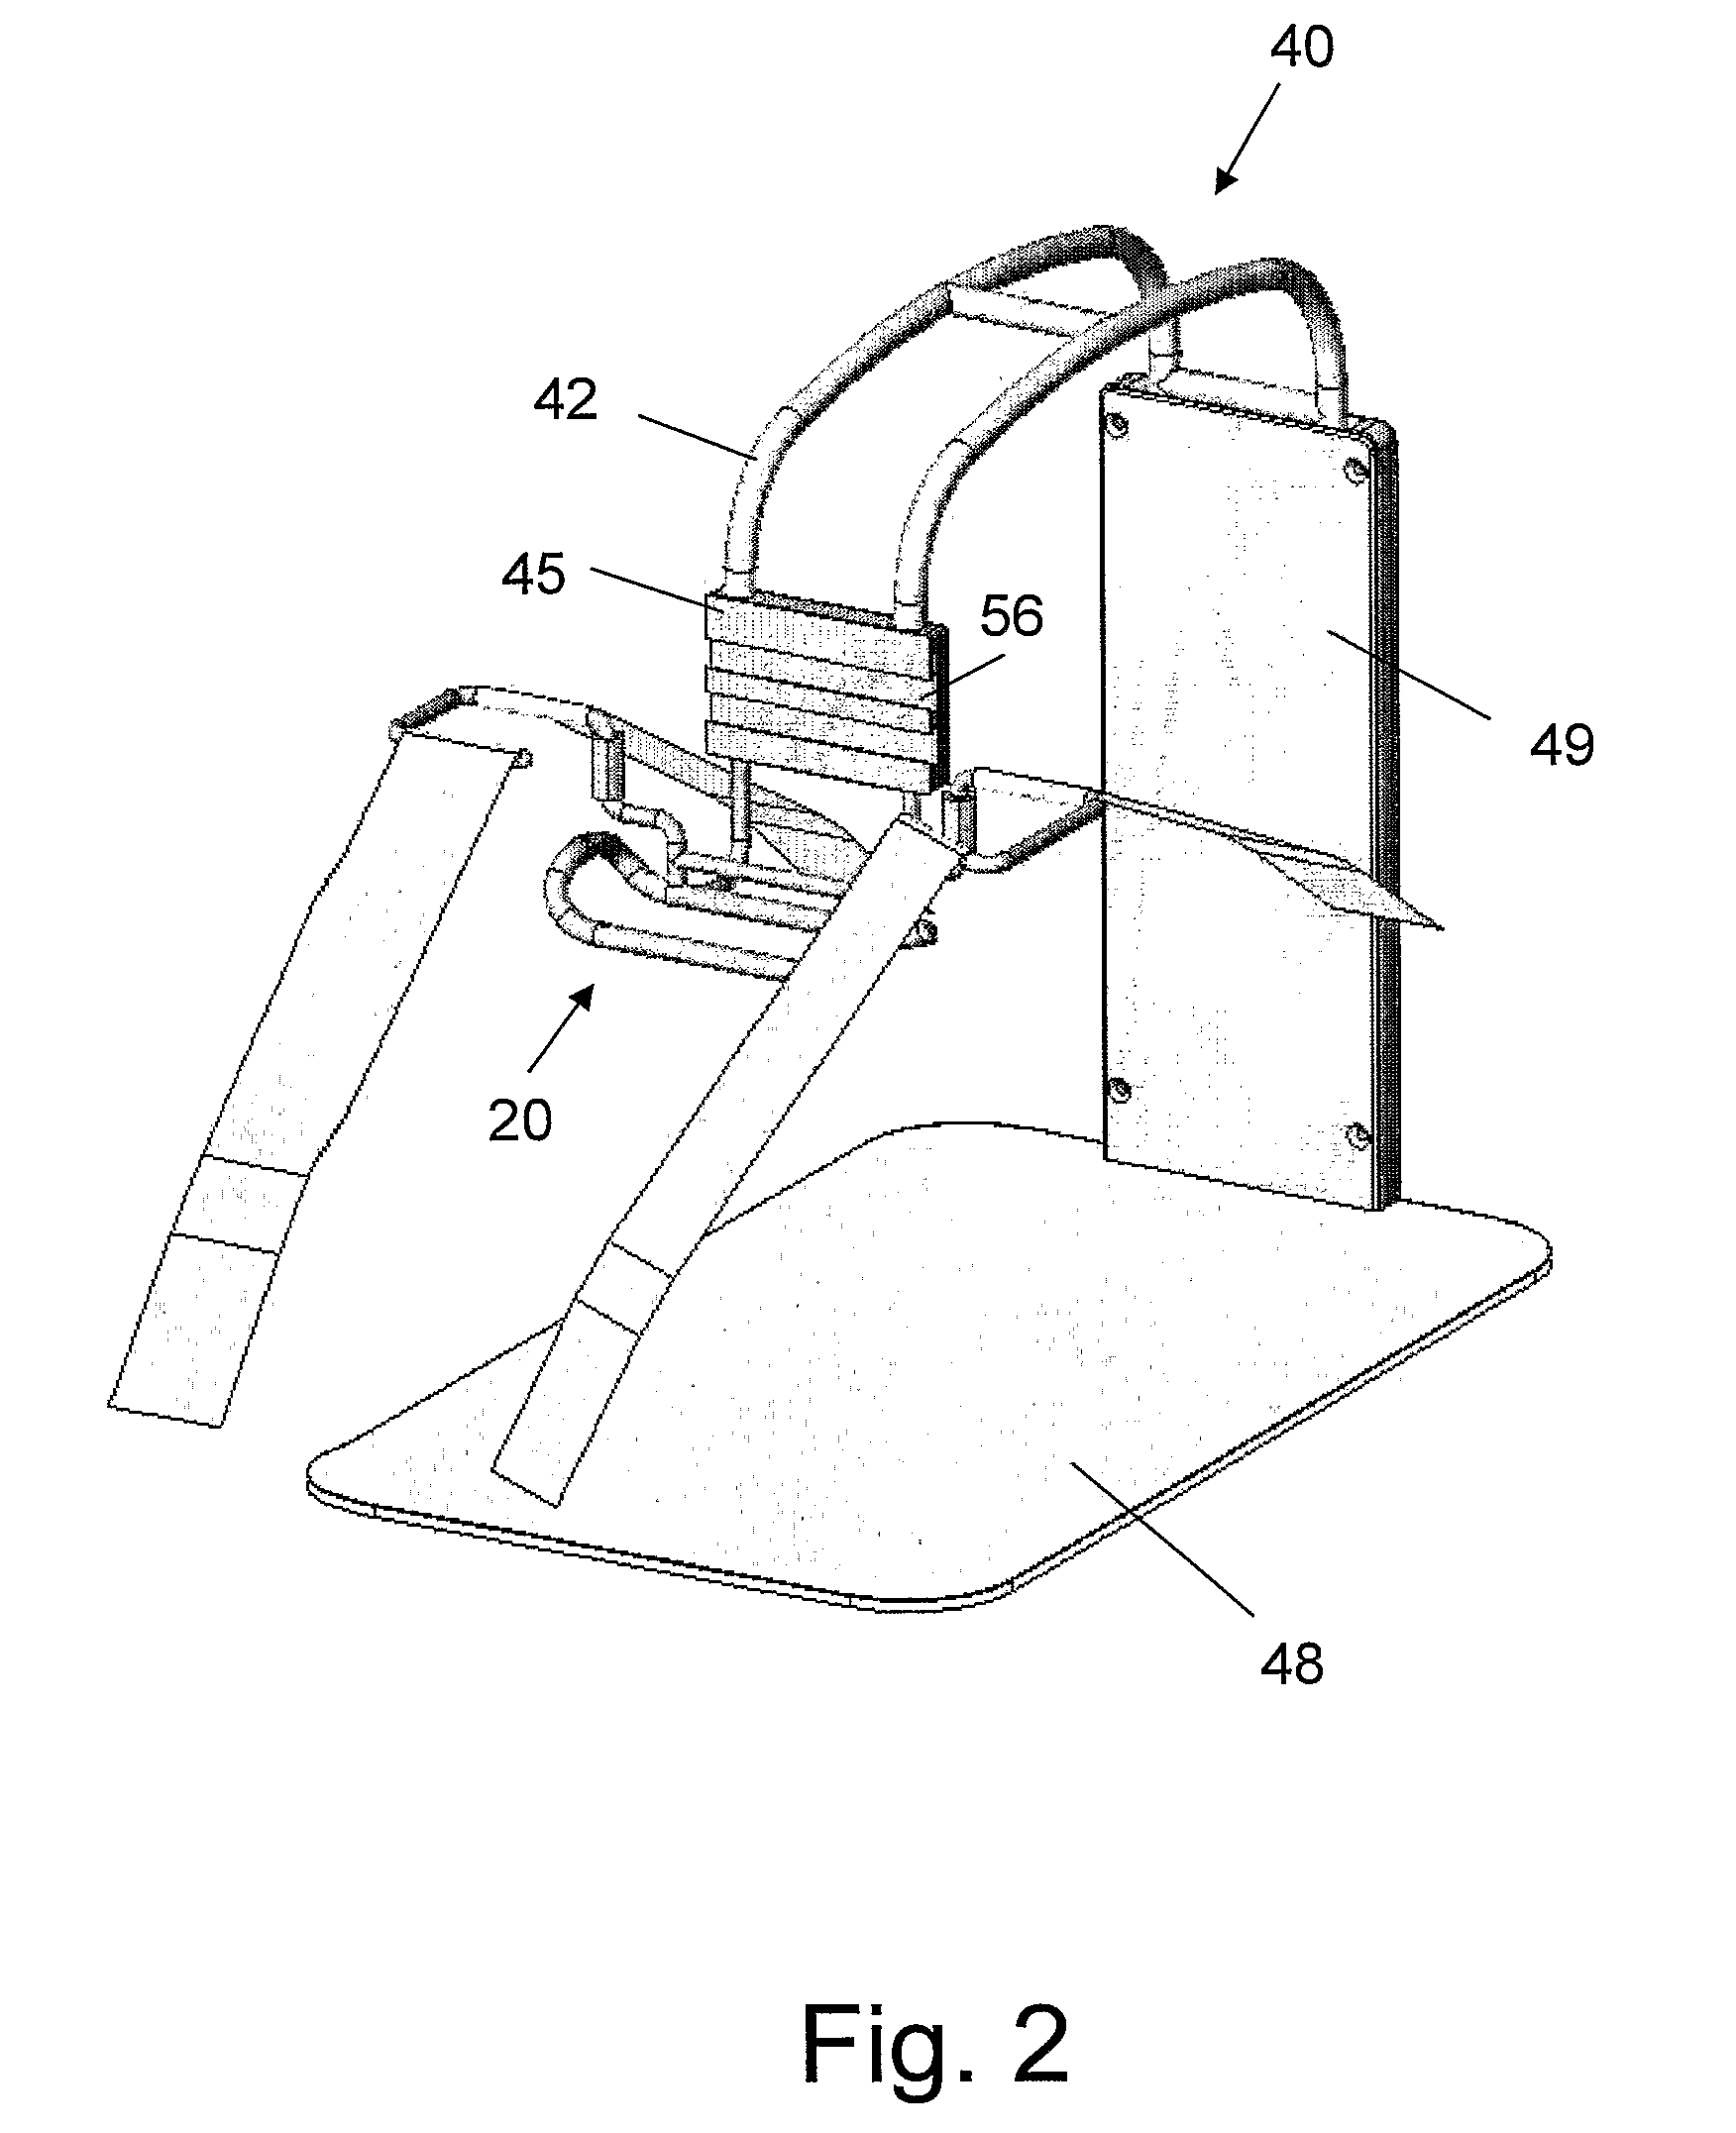 Device and method for maintaining pressure onto a blood vessel